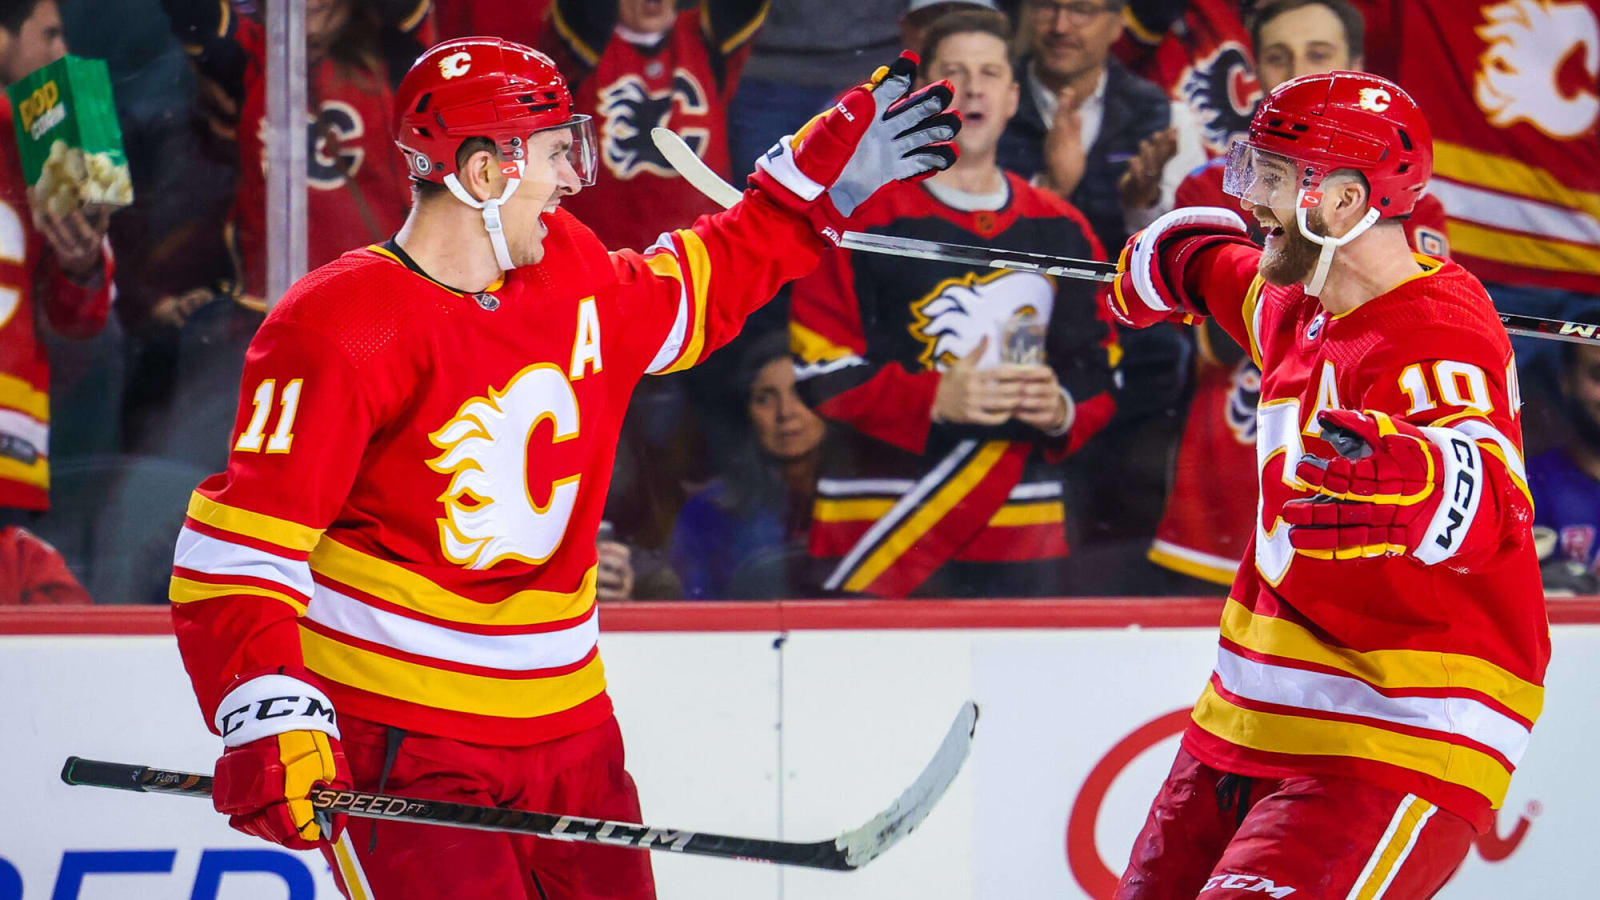 With new coaching staff in place, the Calgary Flames will try to revamp their special teams